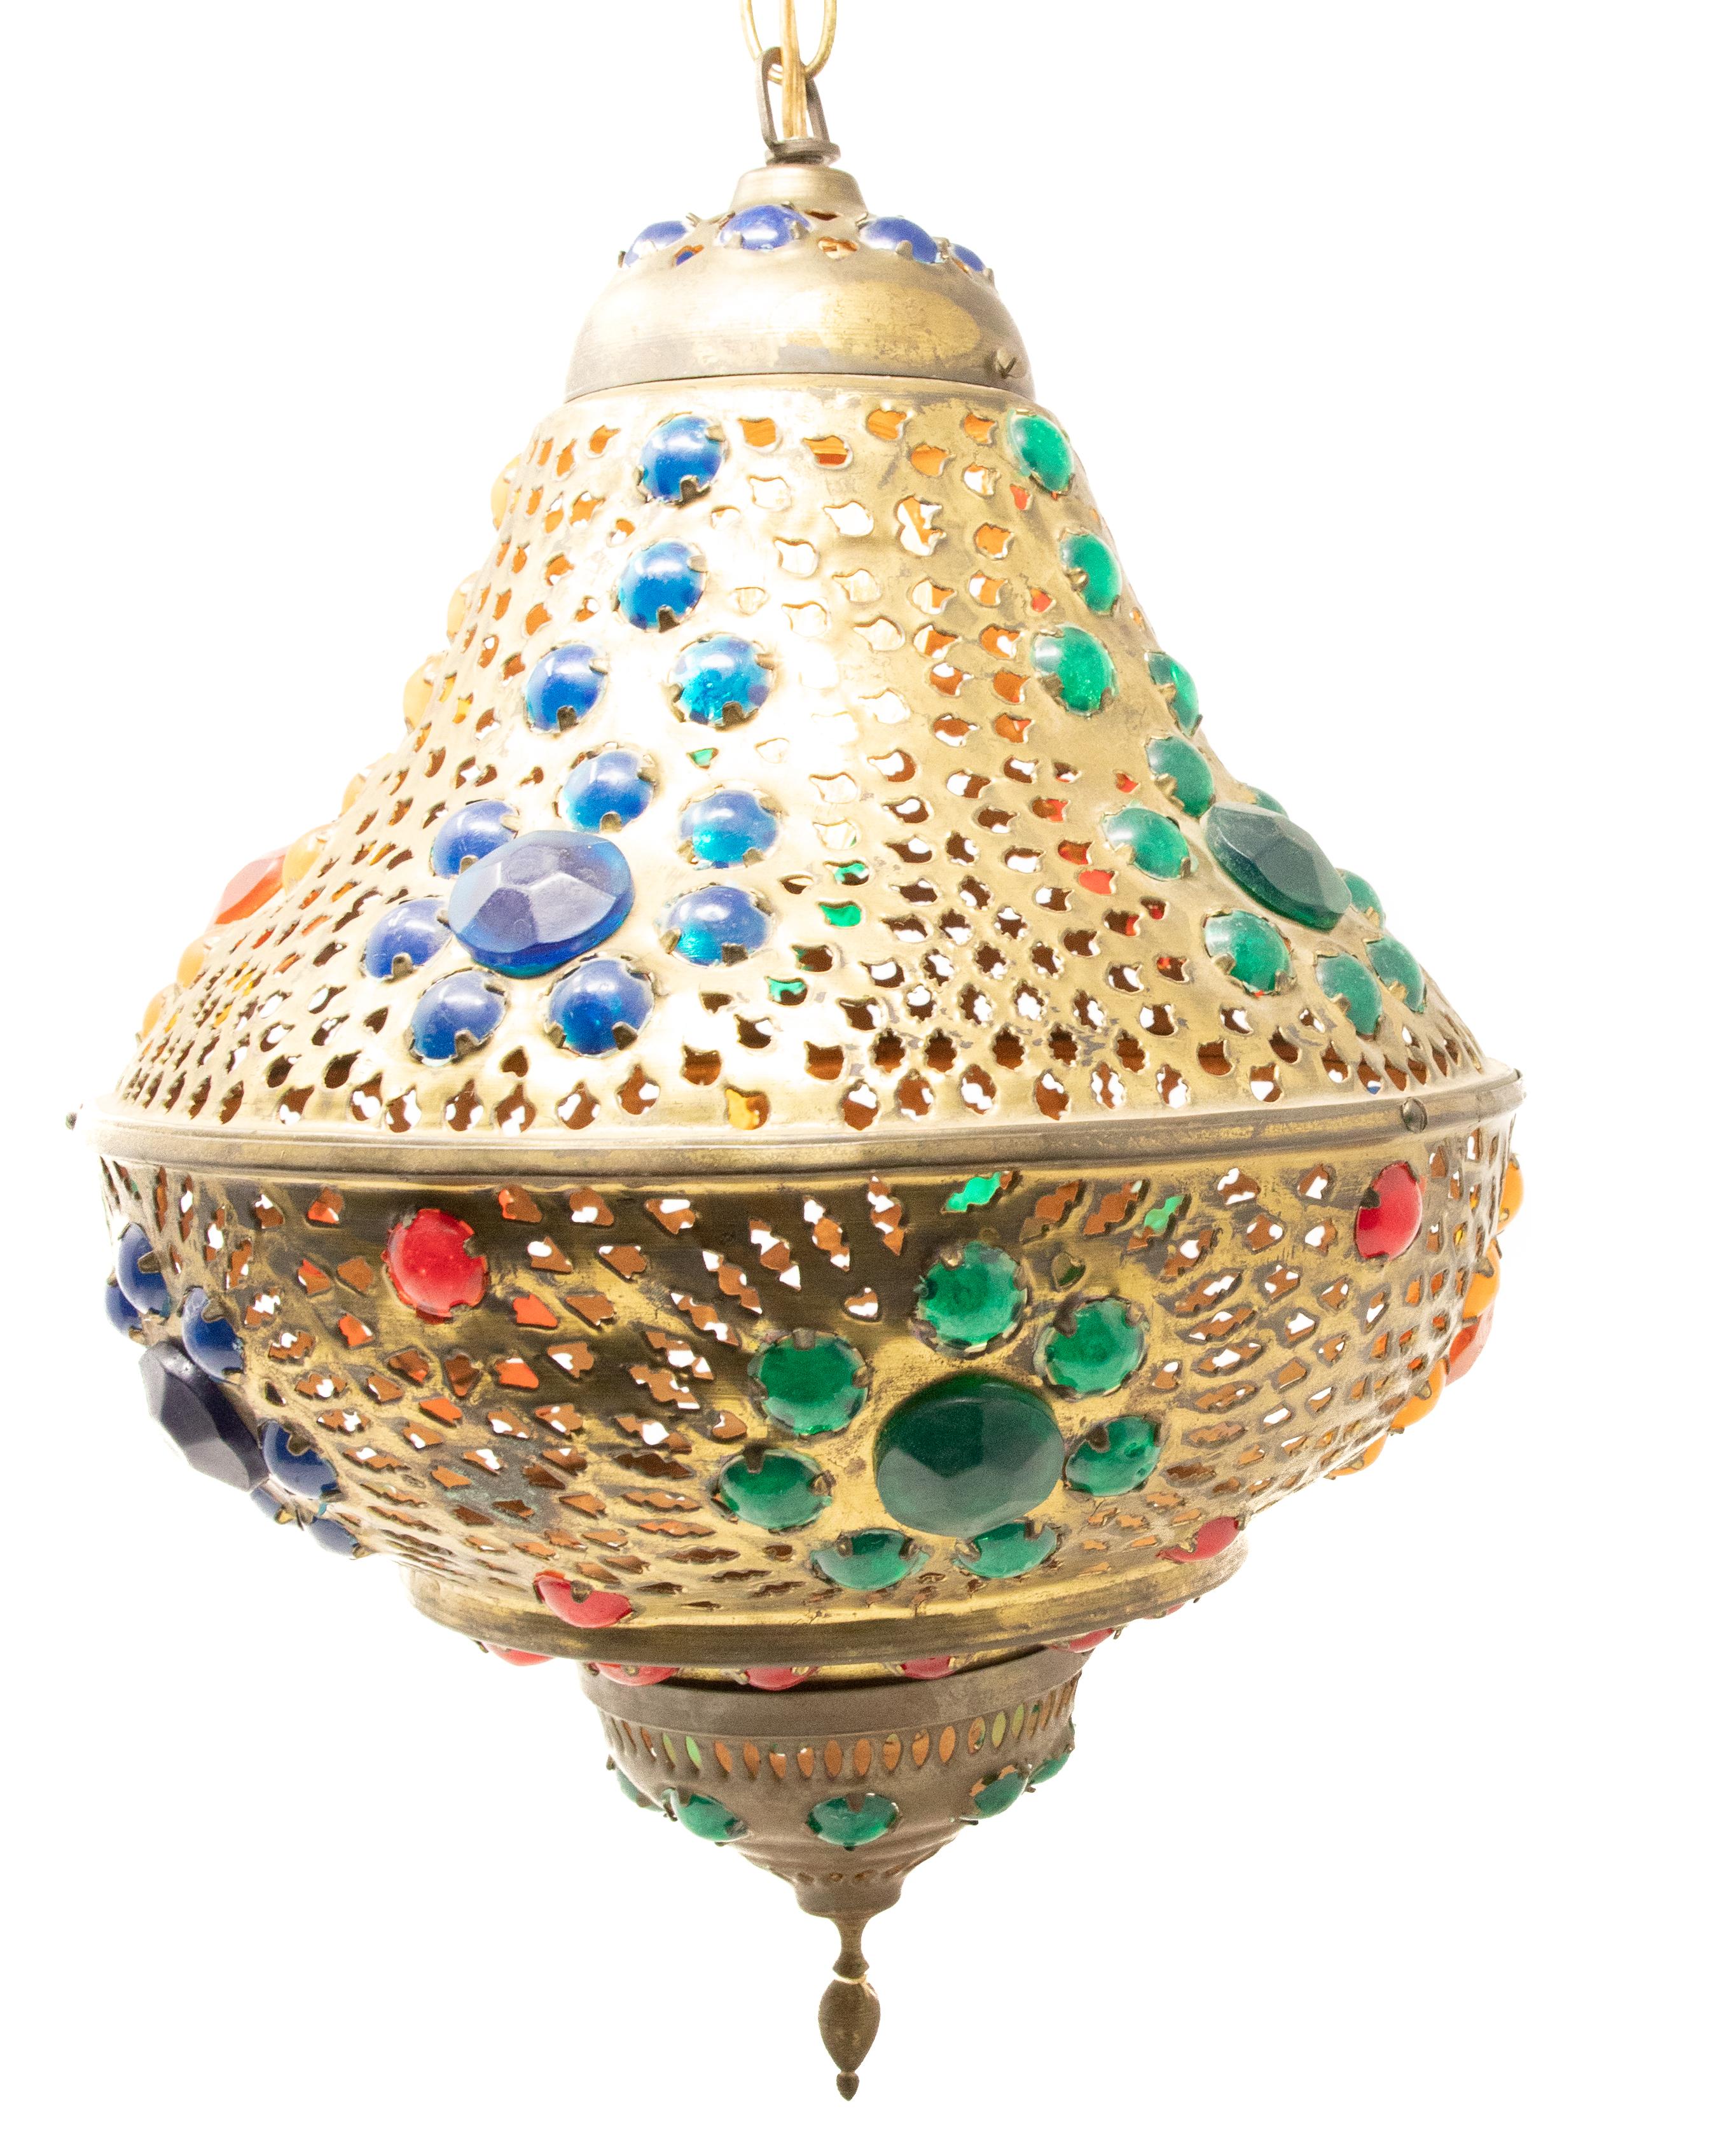 Moroccan Hanging Lamp In Fair Condition For Sale In Cookeville, TN